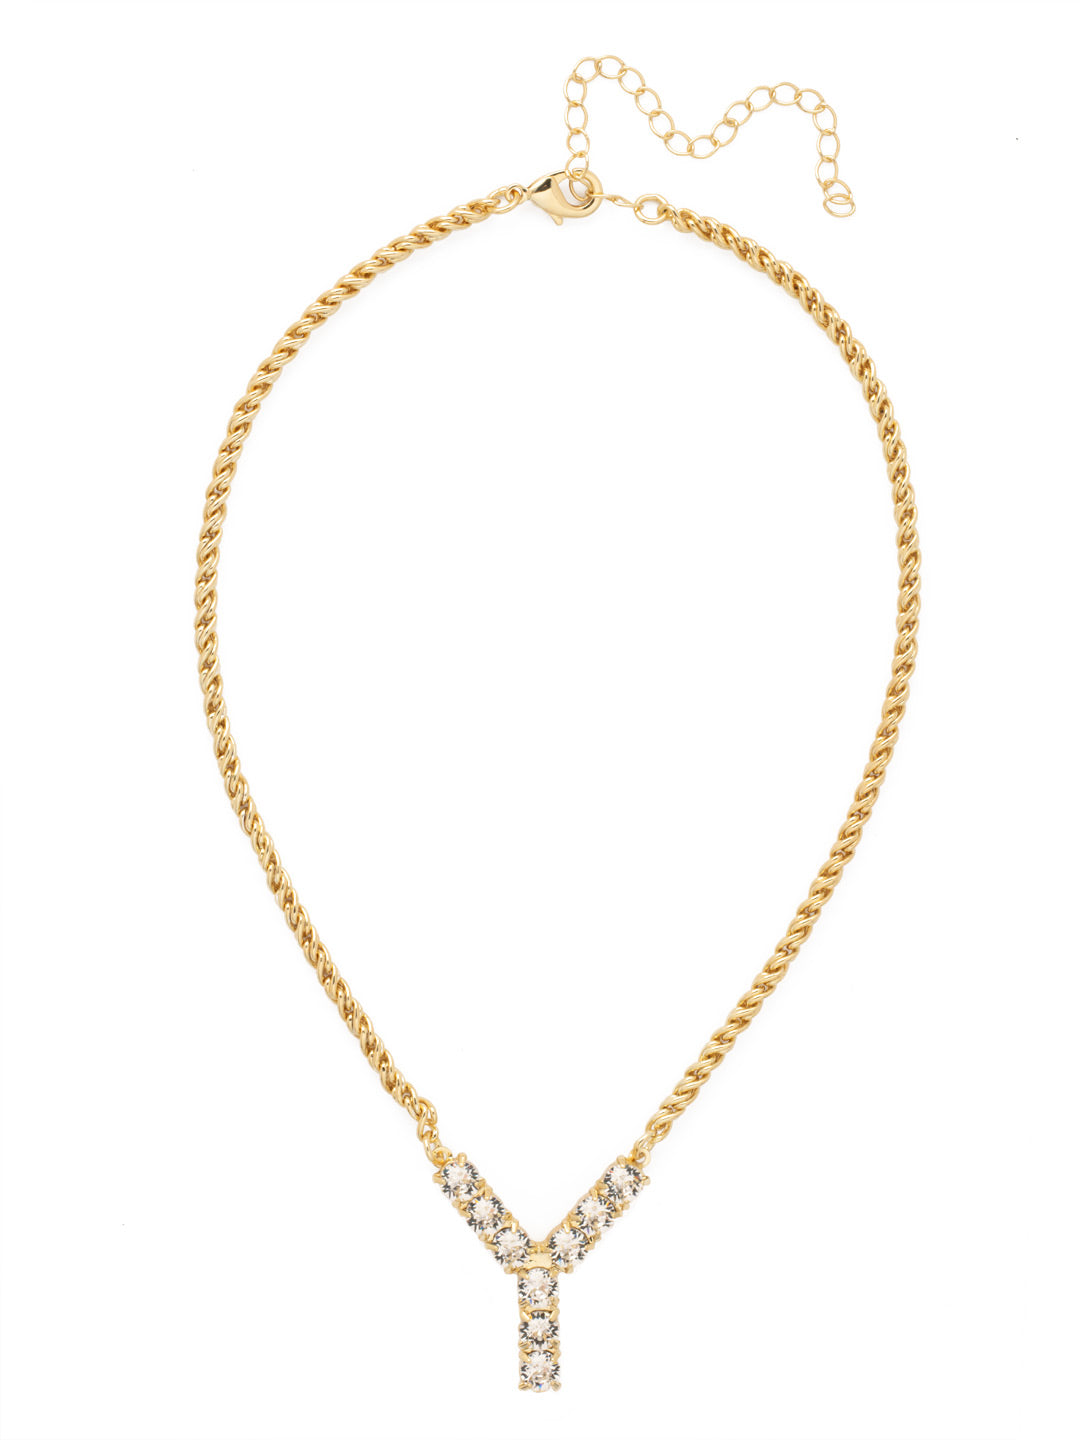 Y Initial Rope Pendant Necklace - NFK44BGCRY - <p>The Initial Rope Pendant Necklace features a crystal encrusted metal monogram pendant on an adjustable rope chain, secured with a lobster claw clasp. From Sorrelli's Crystal collection in our Bright Gold-tone finish.</p>